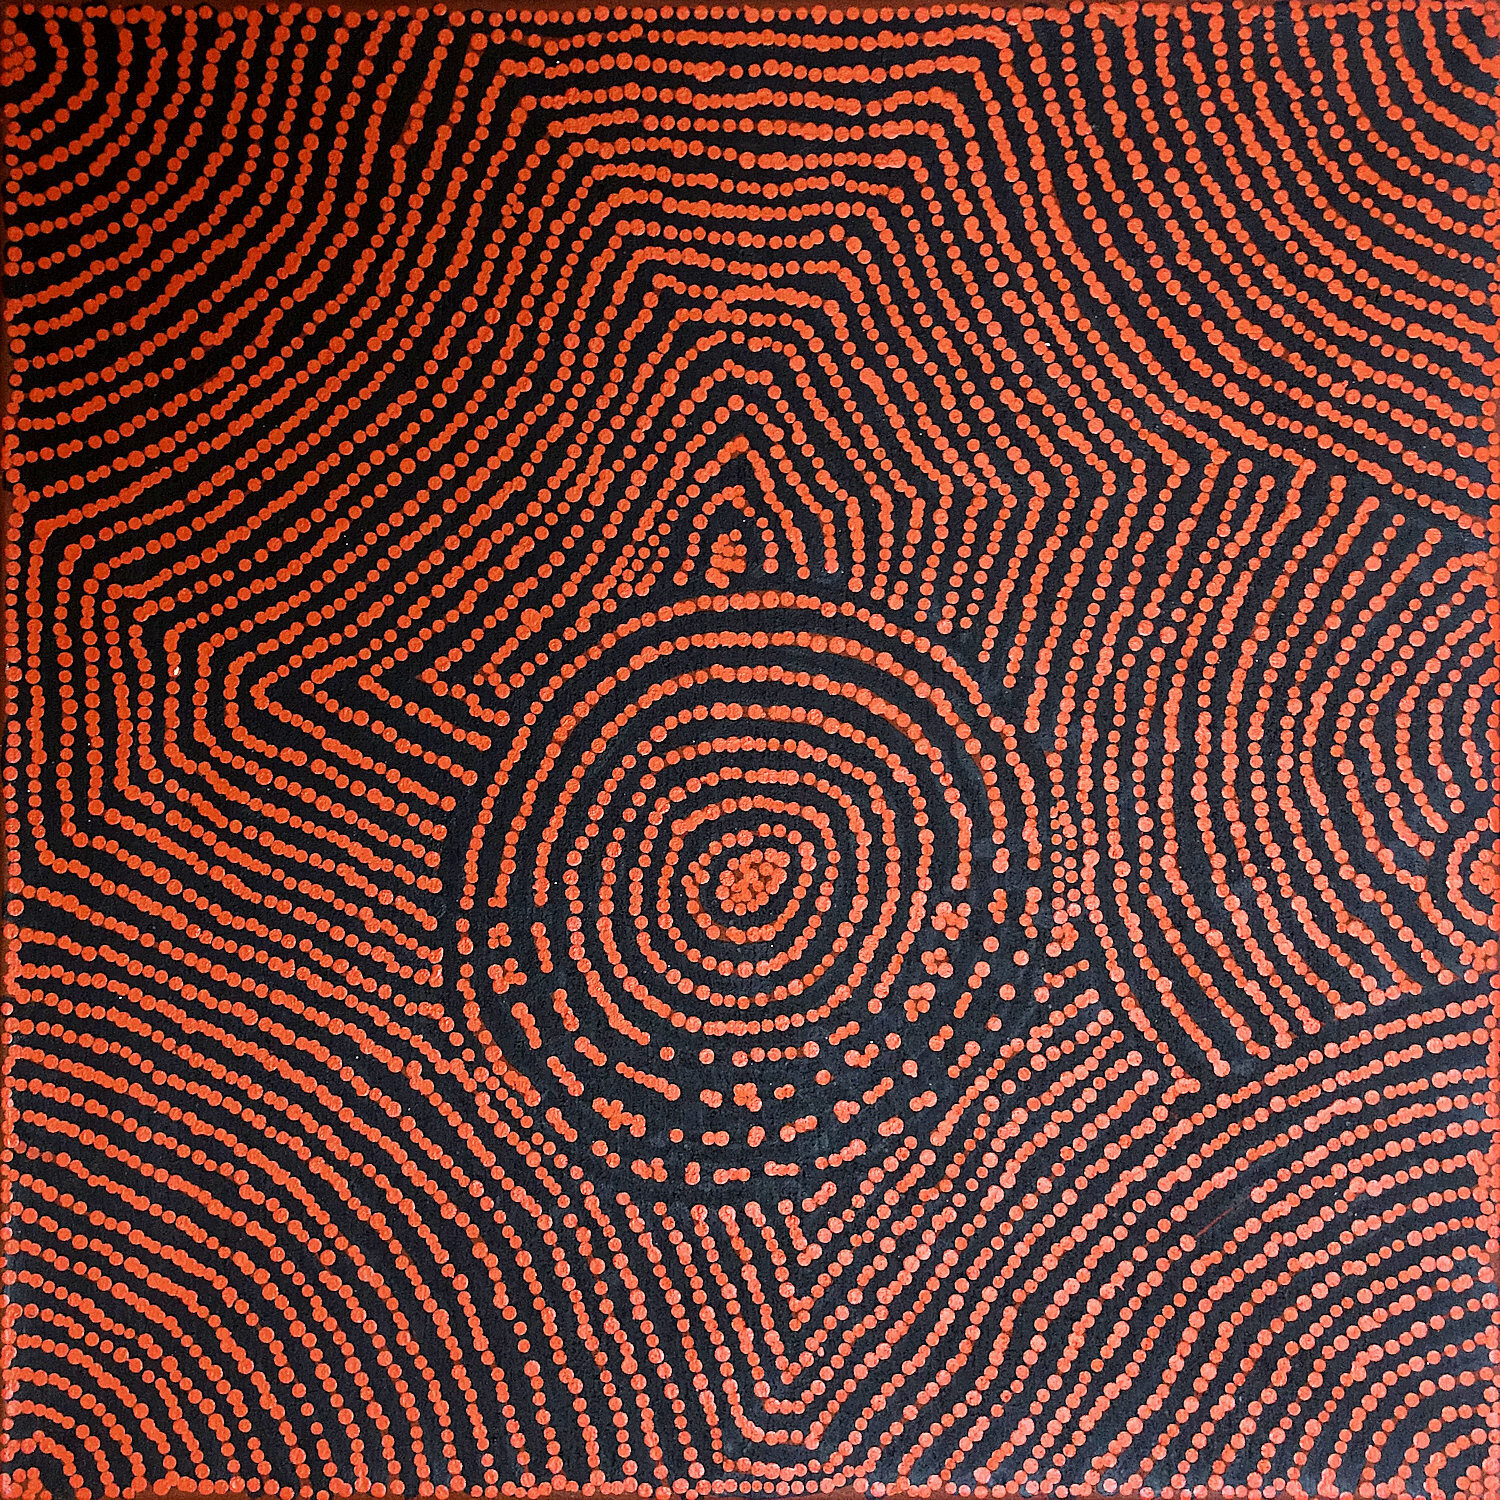 Tingari Cycle (2005) by Barney Campbell Tjakamarra 76x76cm Cat 9456BC